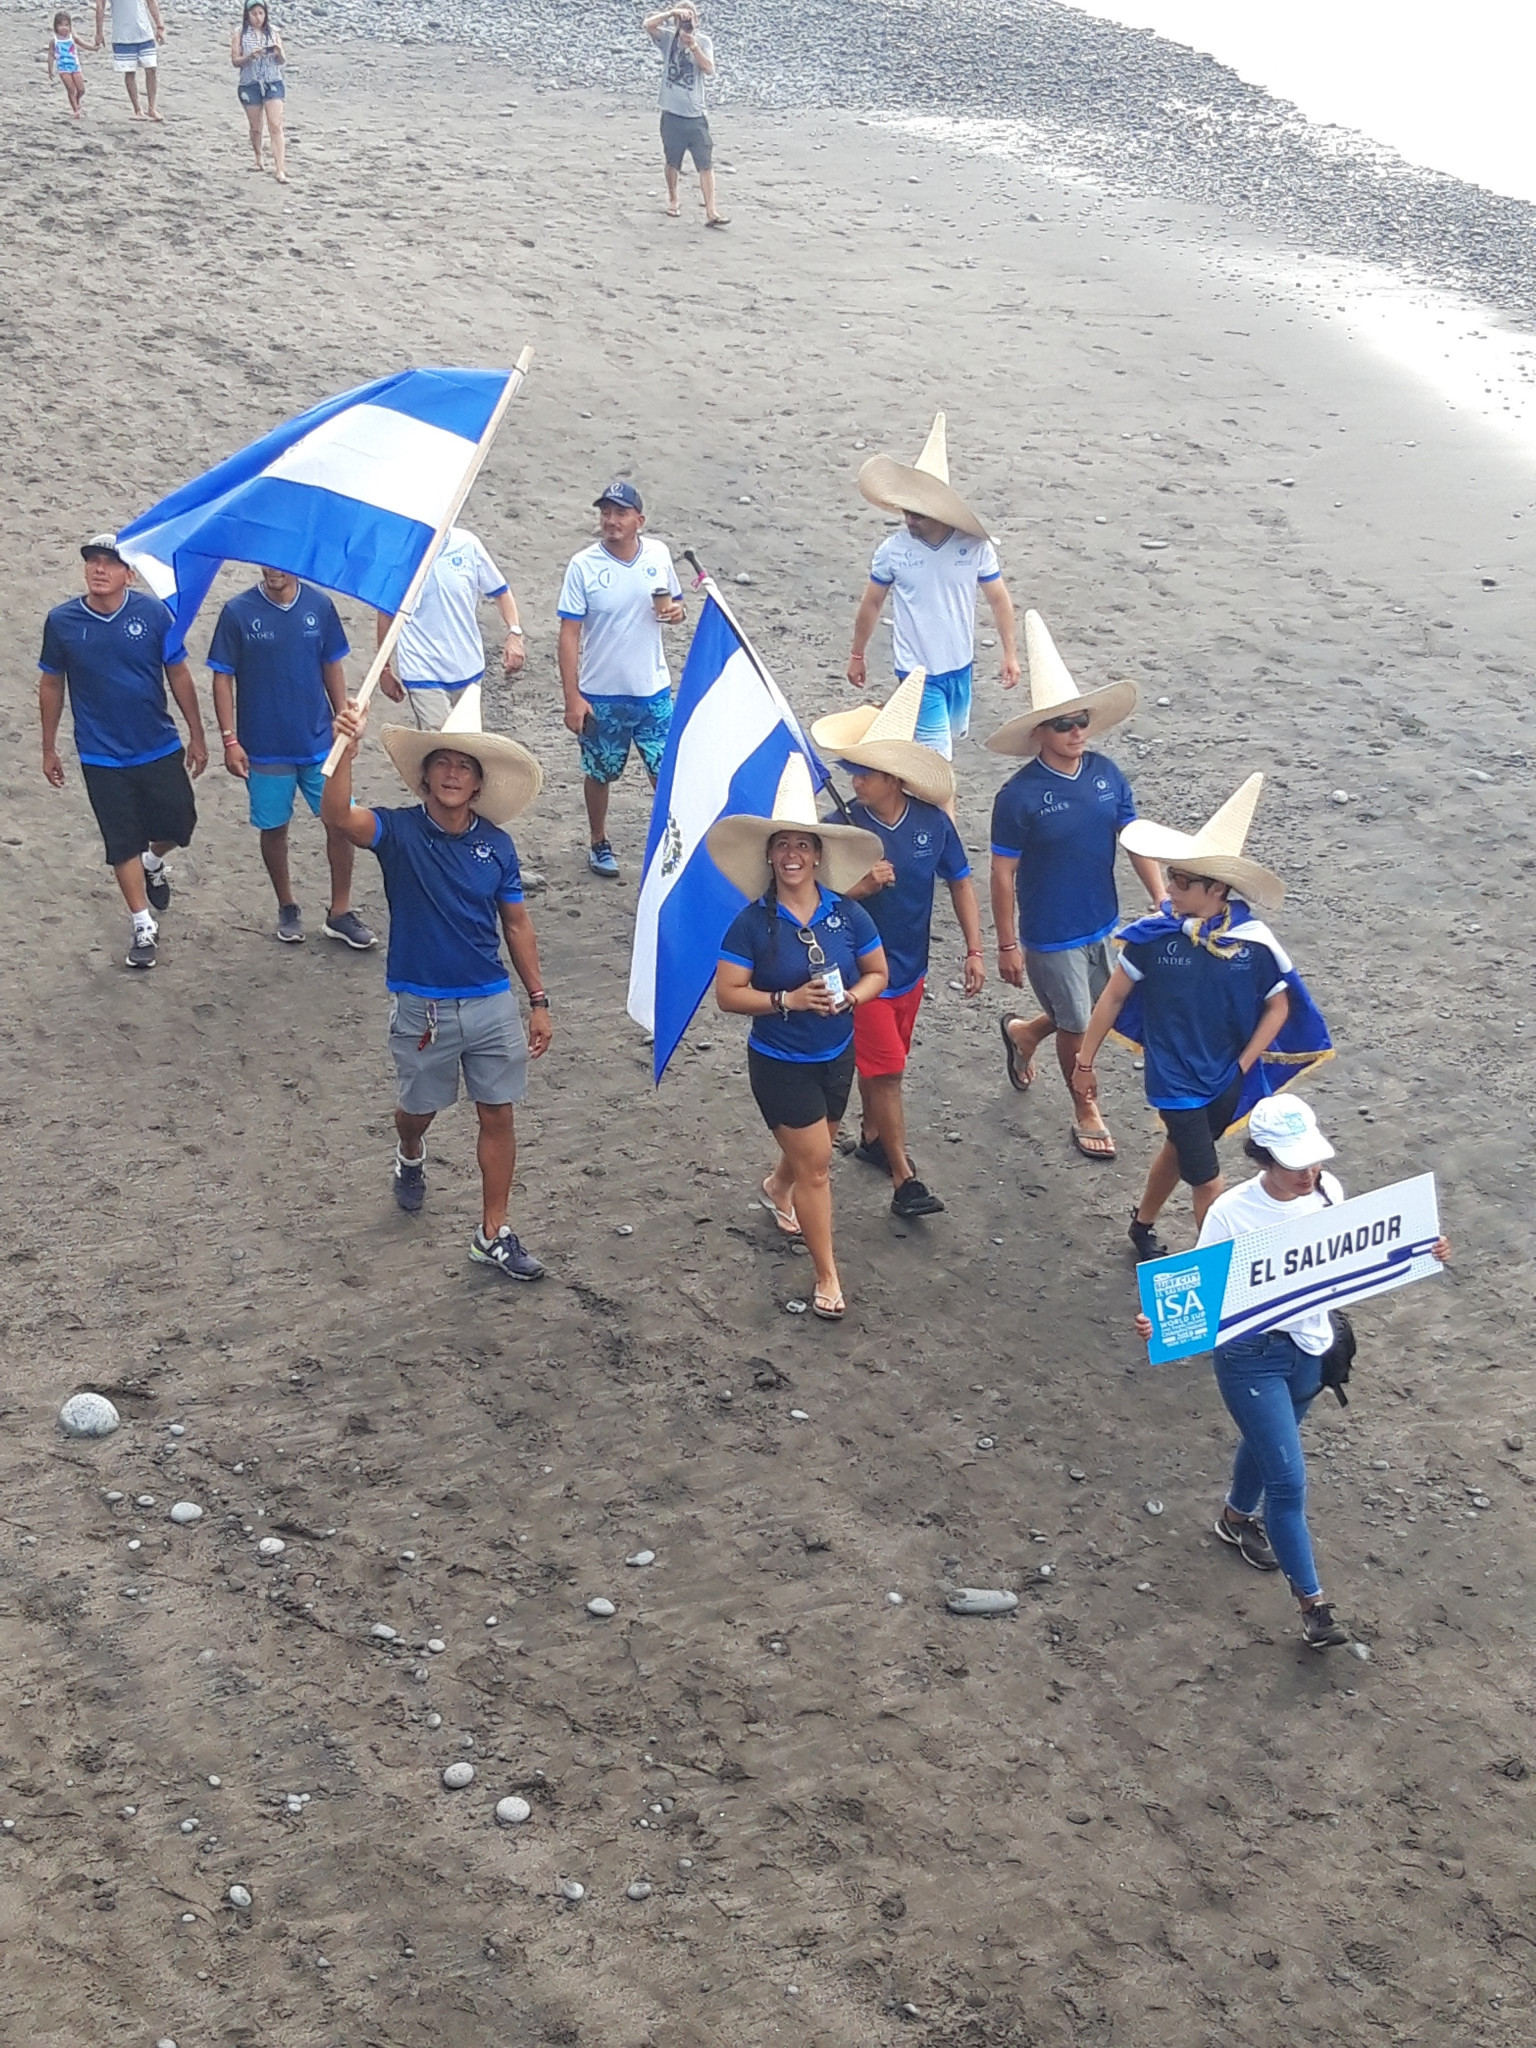 As the hosts, El Salvador were the last country in the parade of nations at El Sunzal ©ITG 